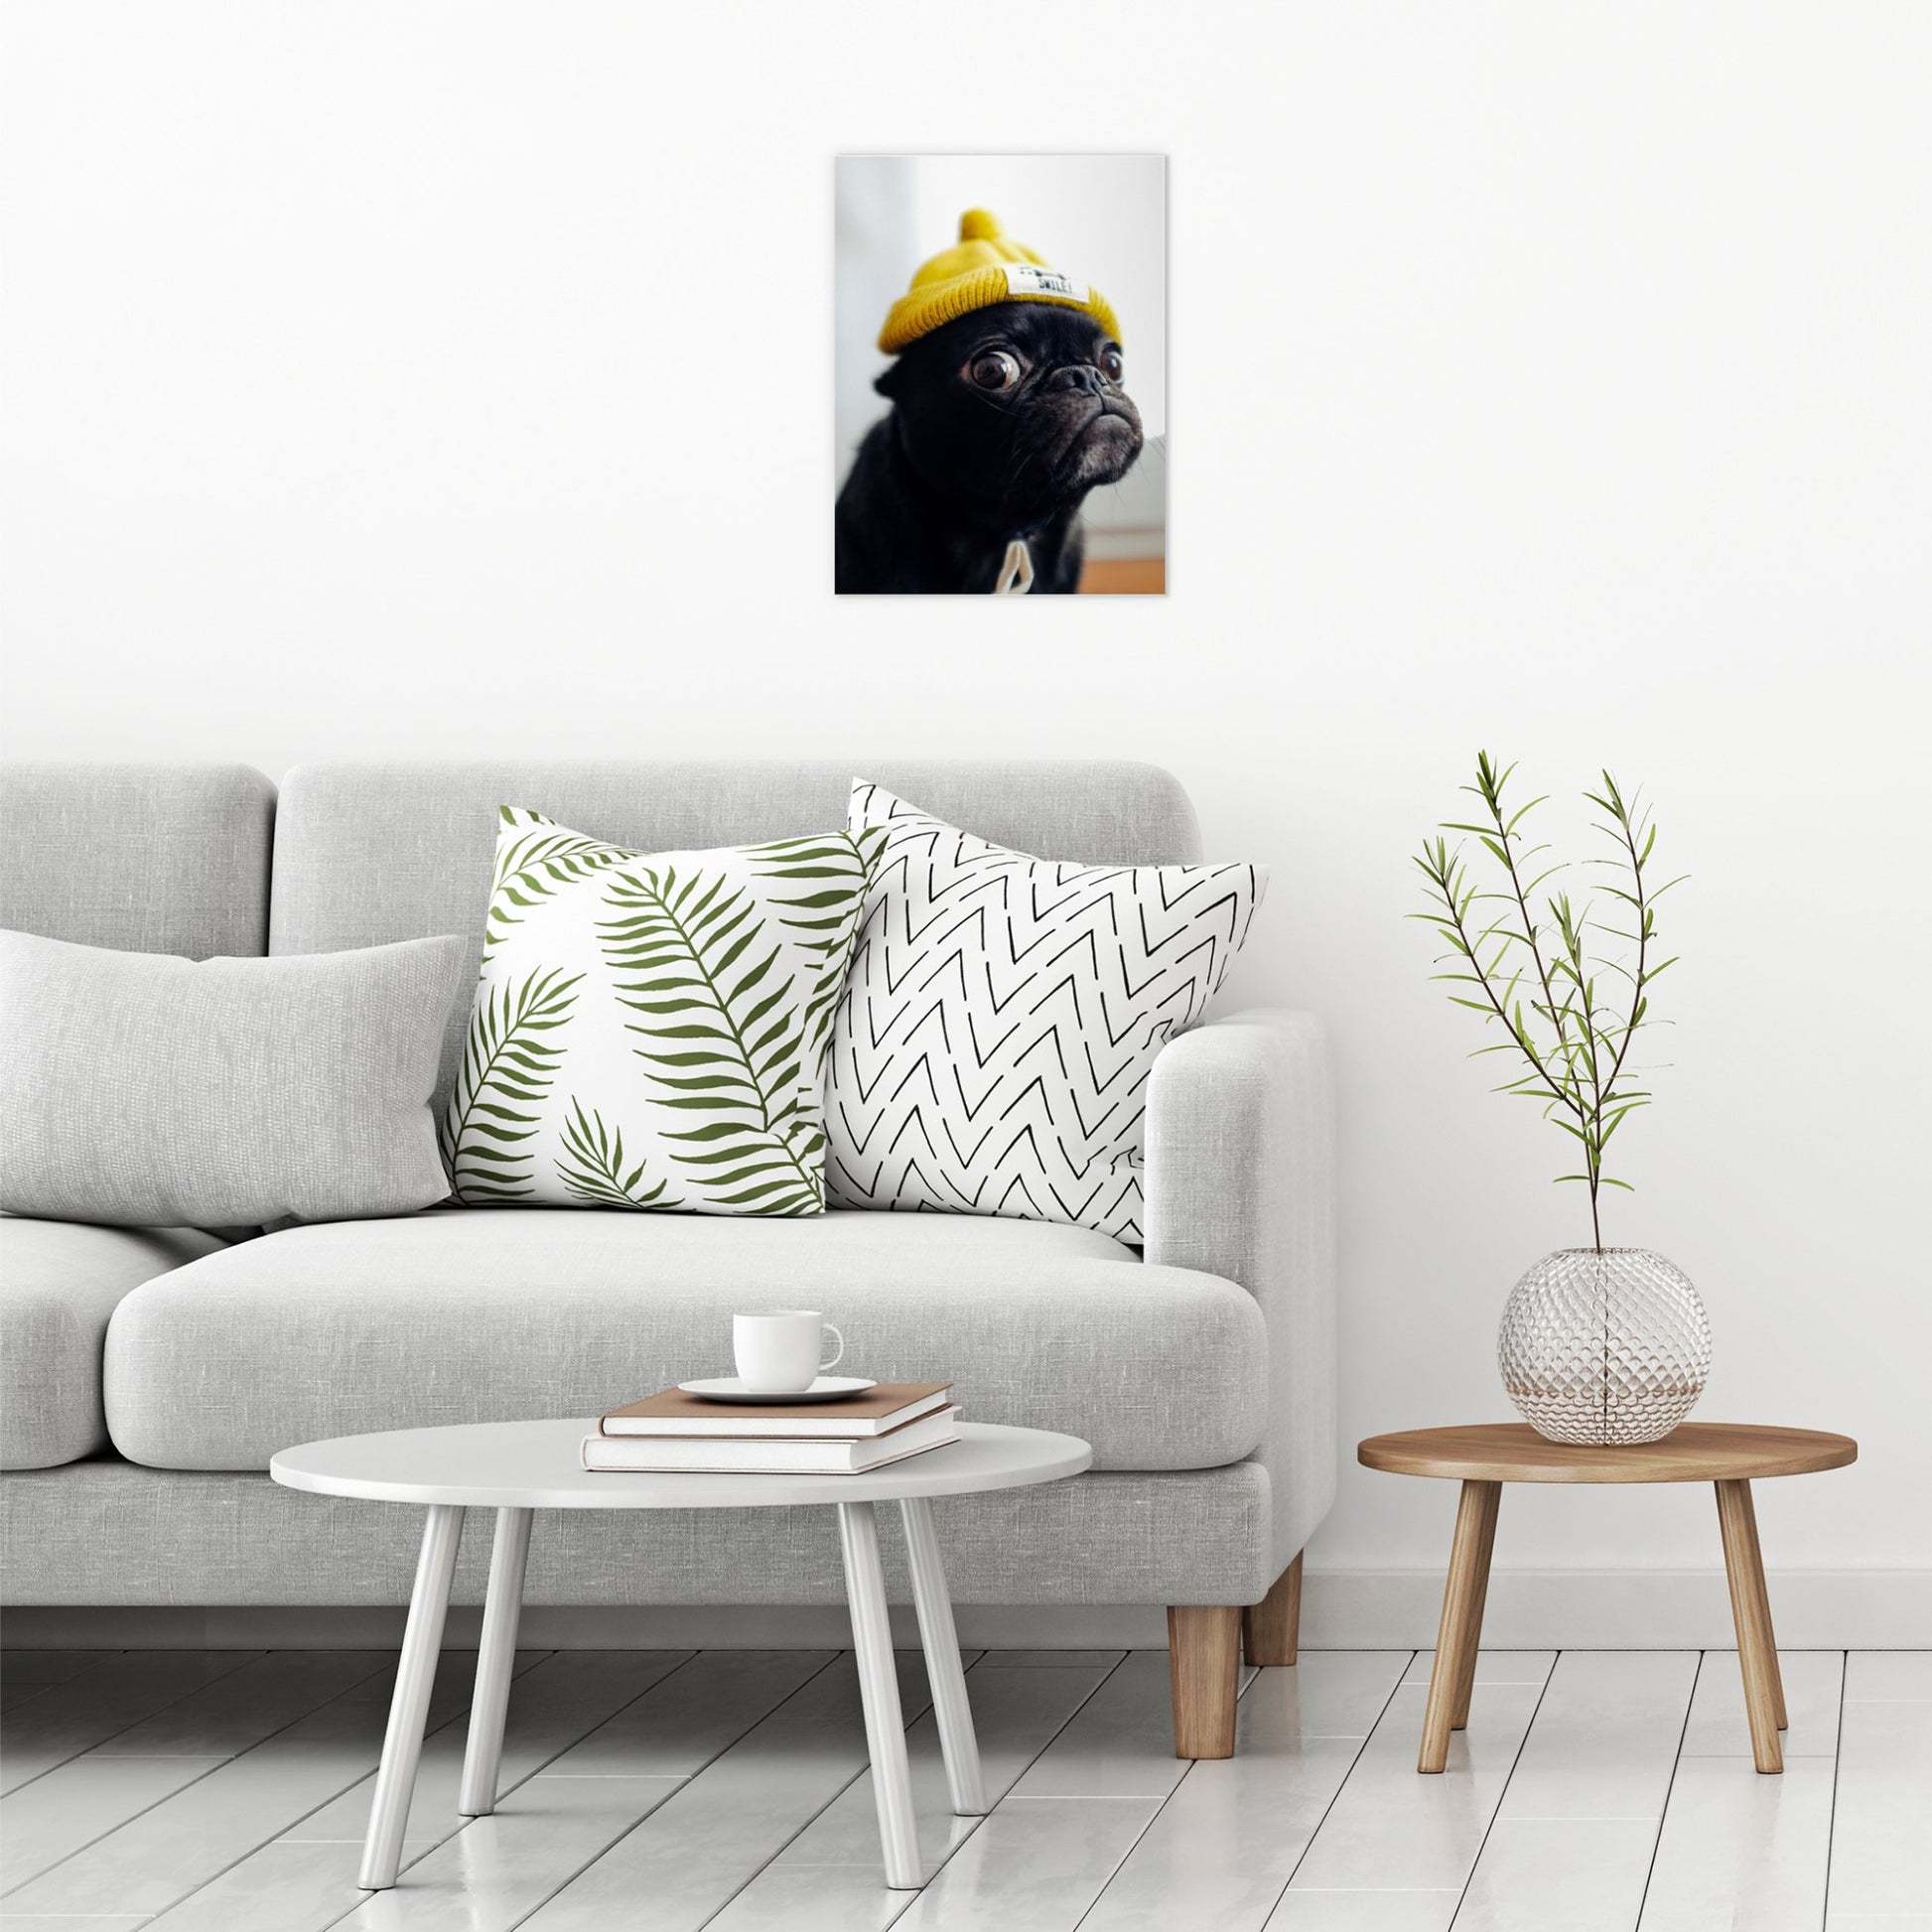 A contemporary modern room view showing a medium size metal art poster display plate with printed design of a Pug in a Yellow Hat